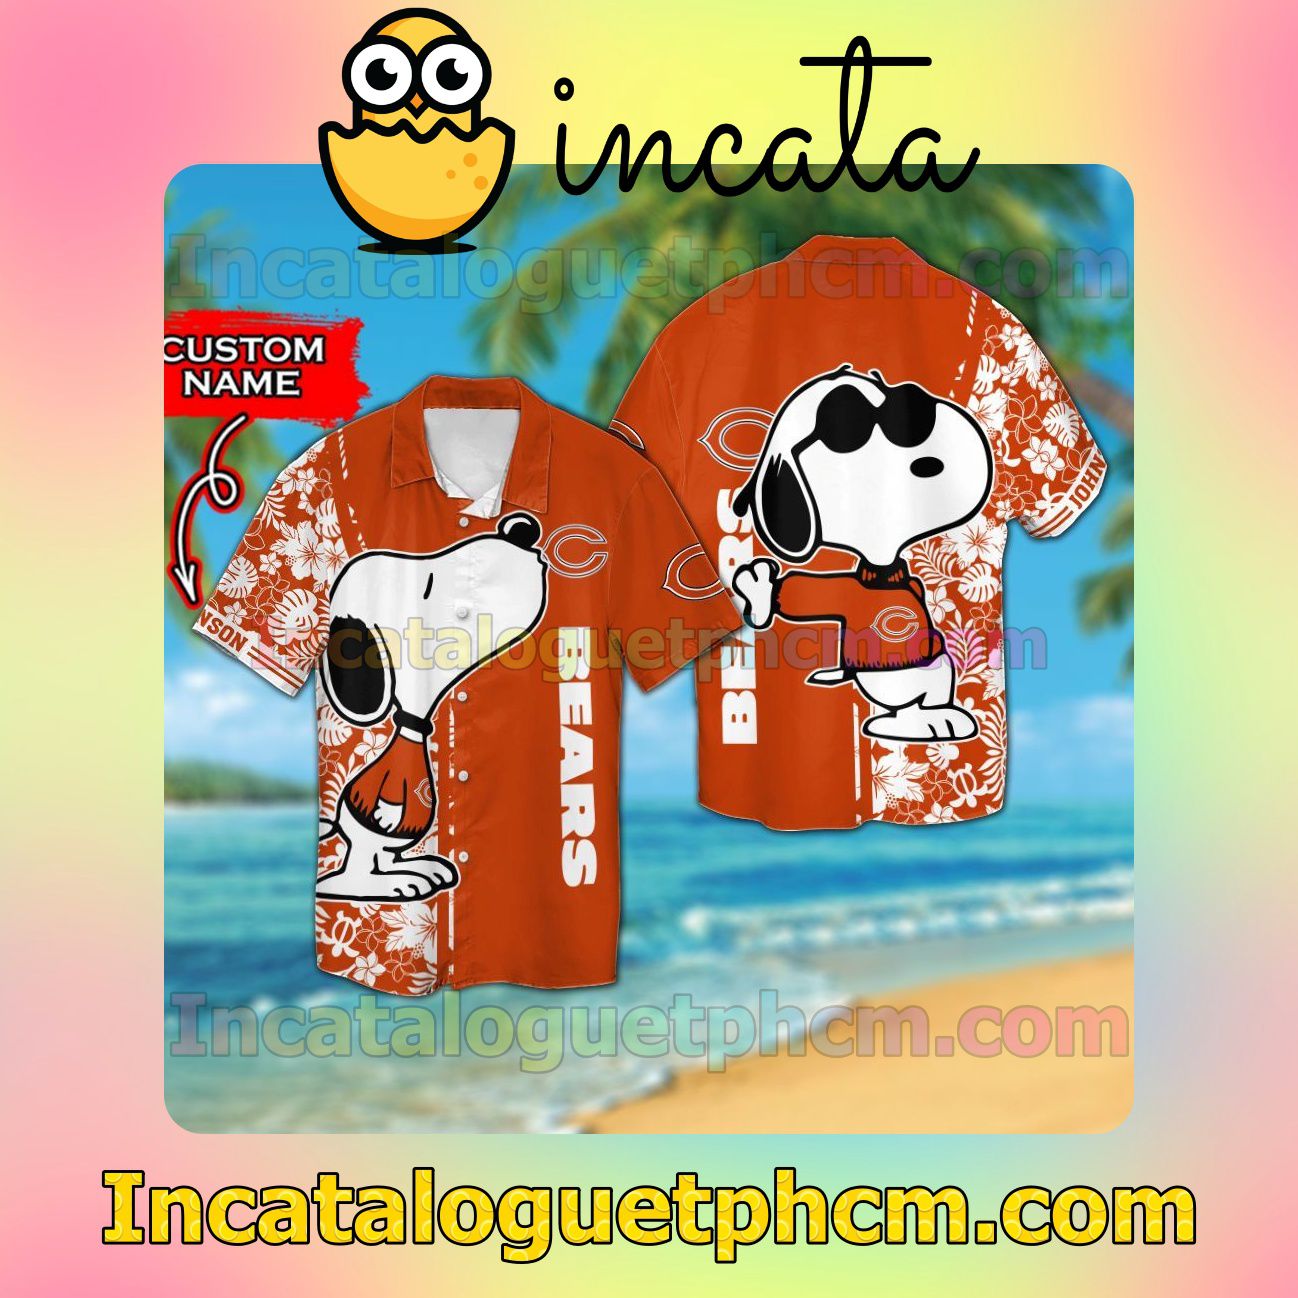 Personalized Chicago Bears & Snoopy Beach Vacation Shirt, Swim Shorts